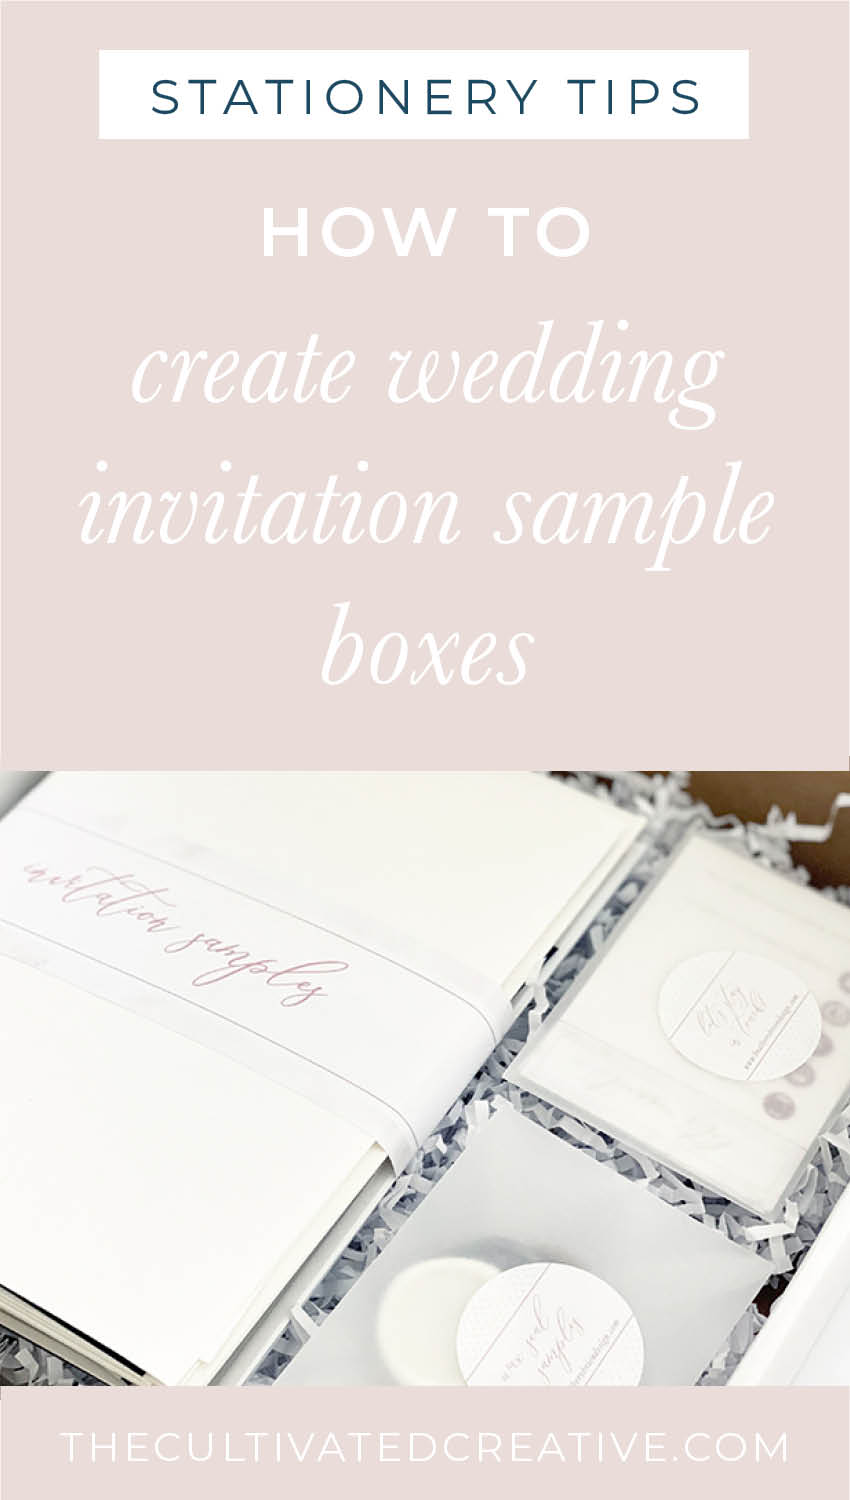 creating wedding invitation sample boxes for vendors or wedding planners | paper swatches, wax seal samples